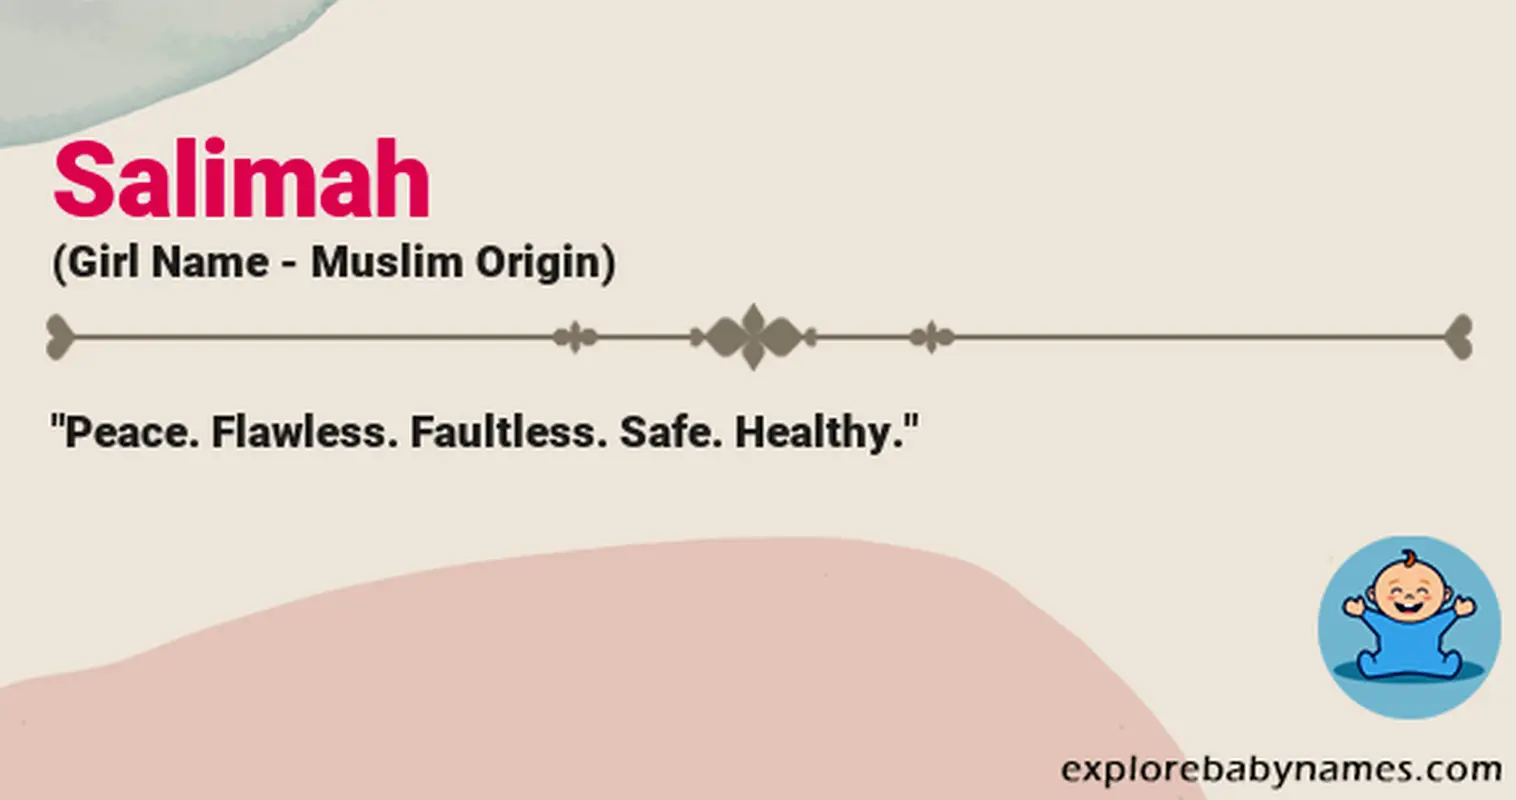 Meaning of Salimah